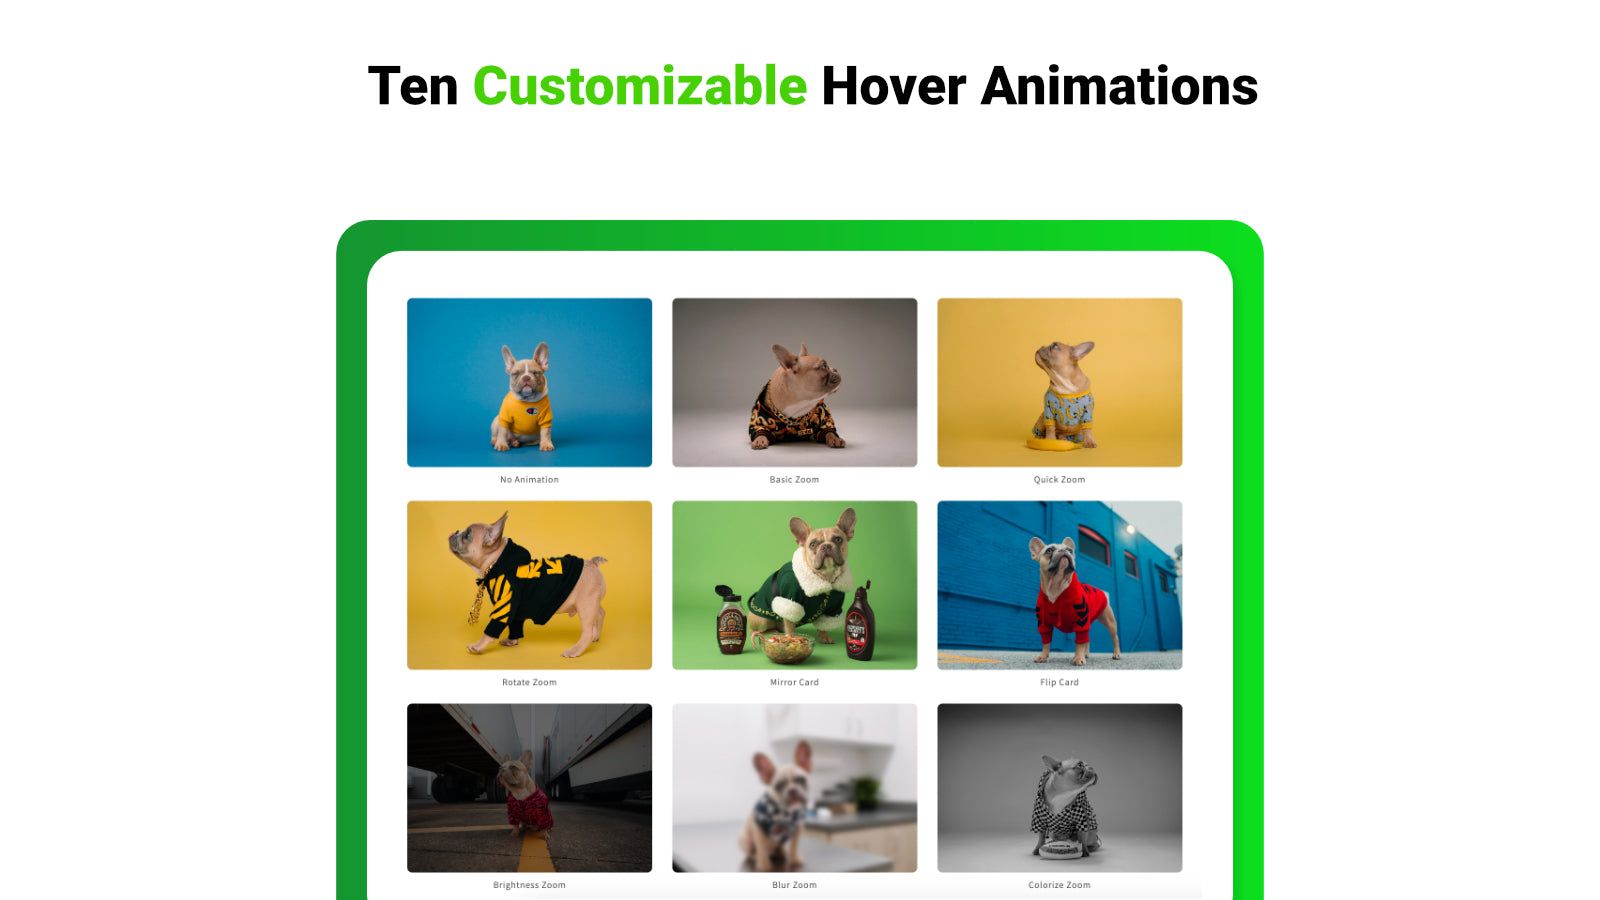 second image hover animation - hover effect animation